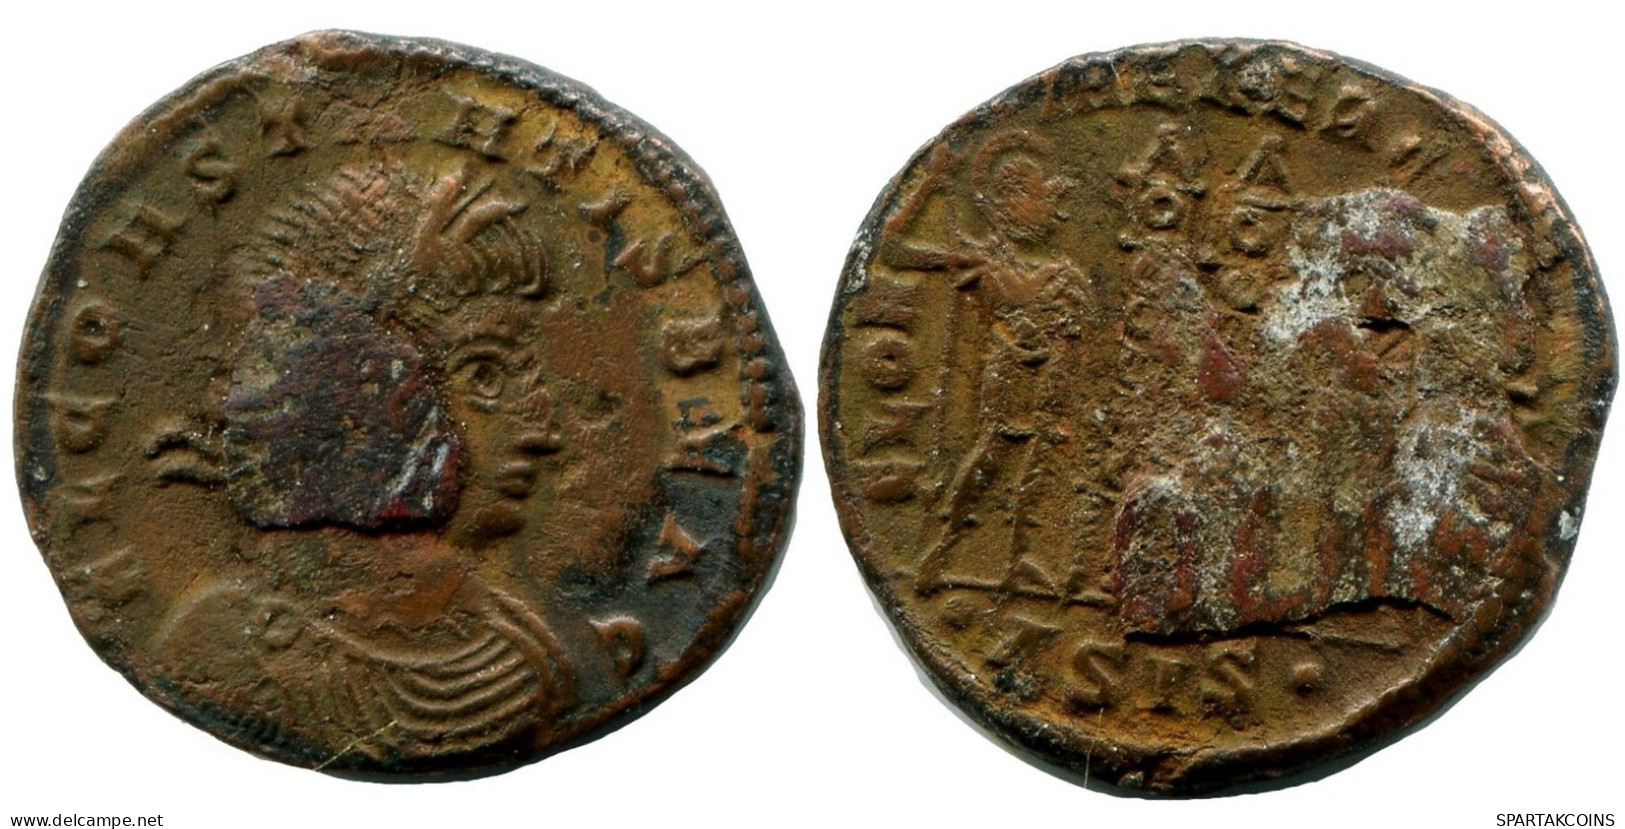 CONSTANS MINTED IN SISCIA FOUND IN IHNASYAH HOARD EGYPT #ANC11568.14.U.A - The Christian Empire (307 AD To 363 AD)